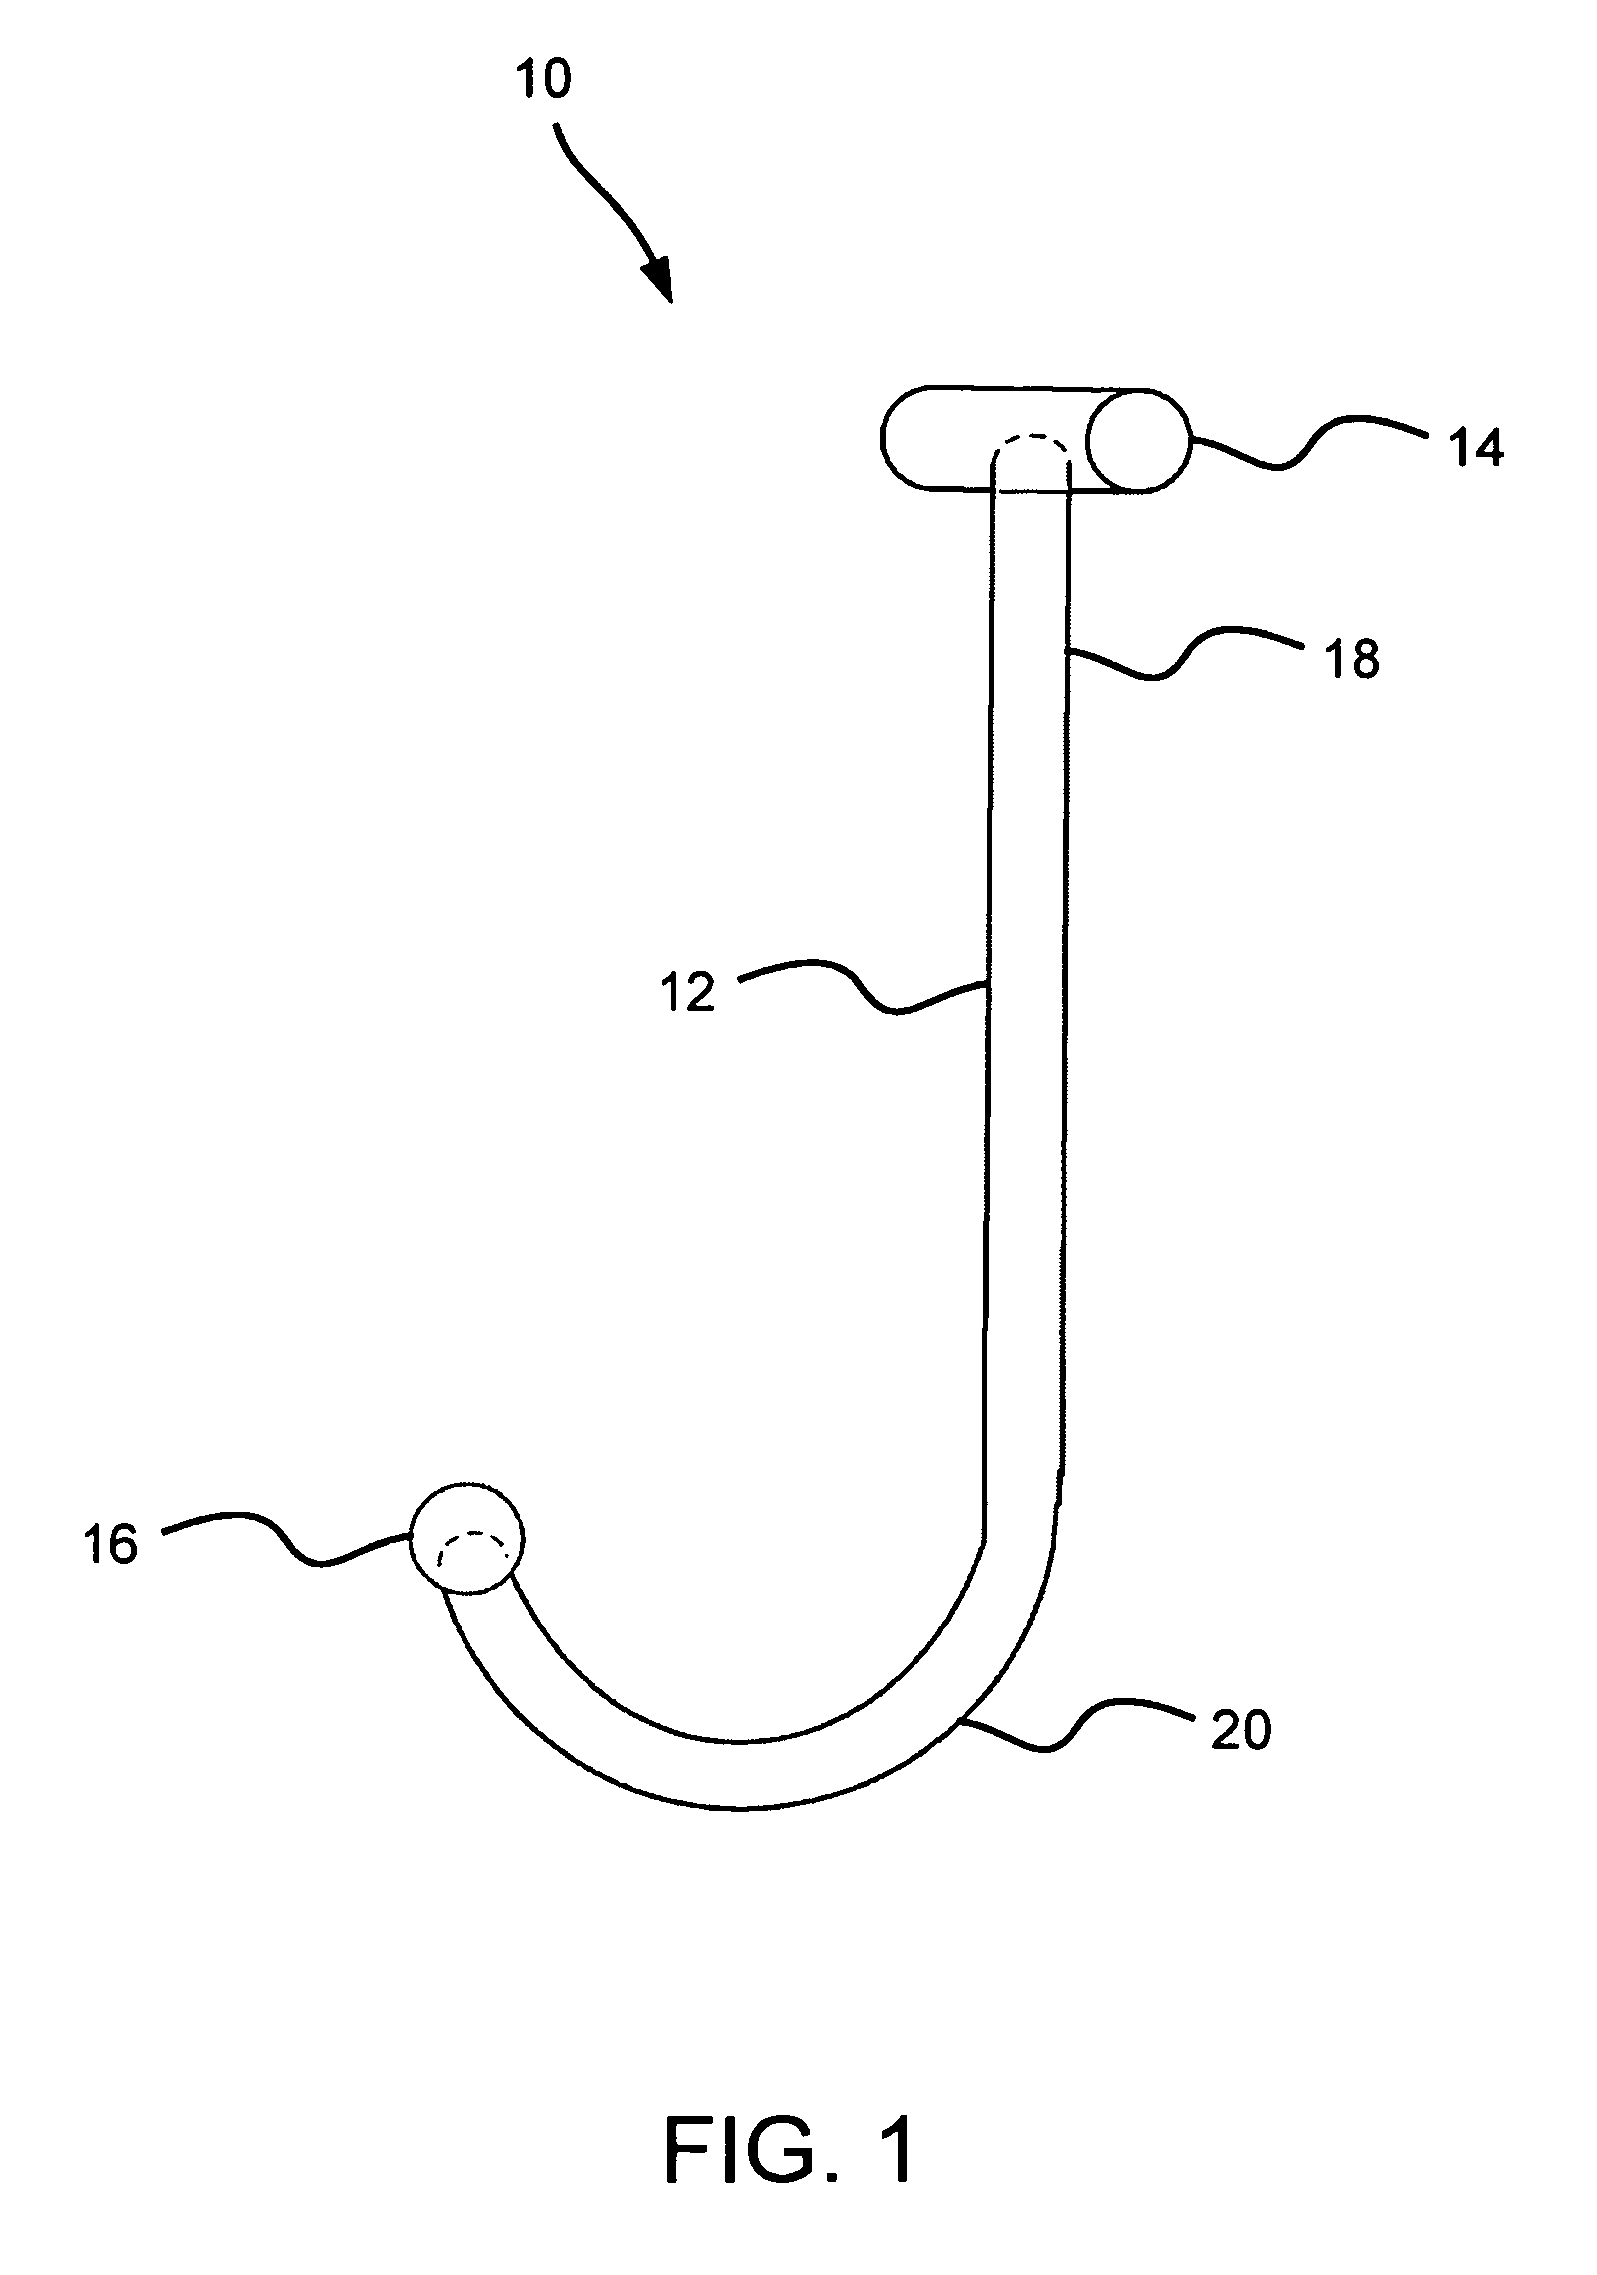 Method and apparatus for treating pelvic pain